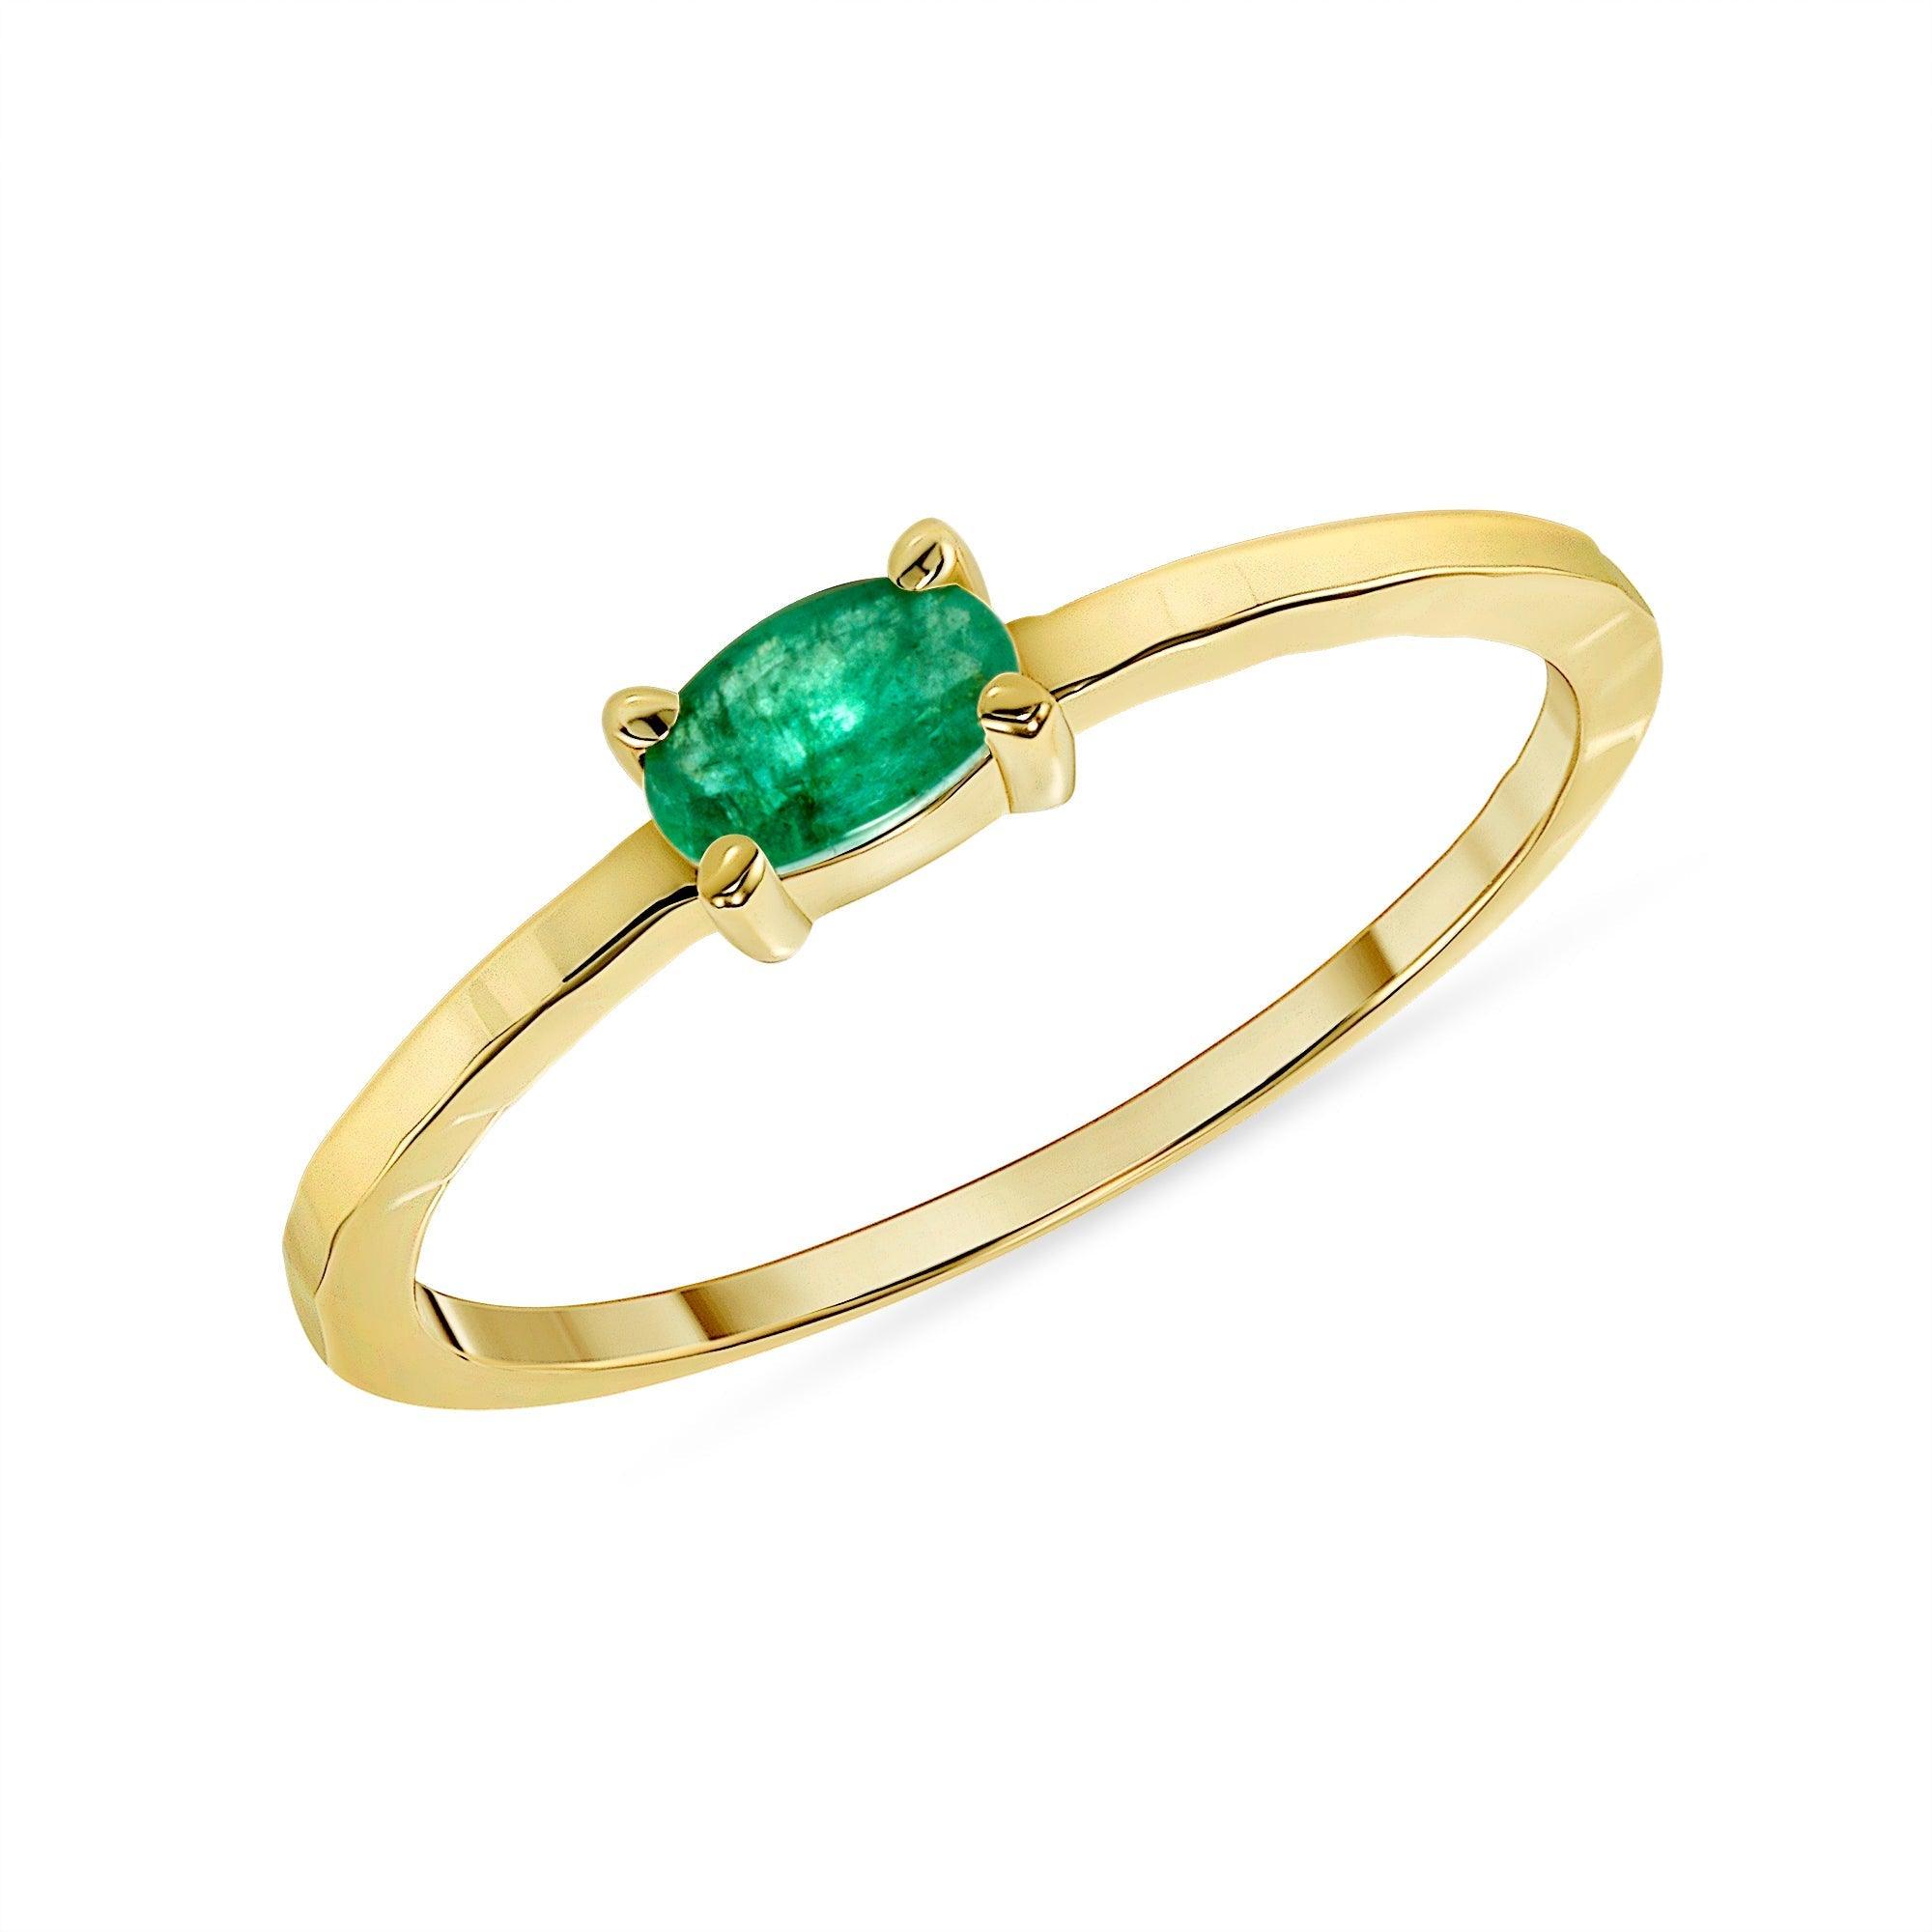 Elegant Solid Gold Oval Emerald Stackable Ring from Rafi's Jewelry